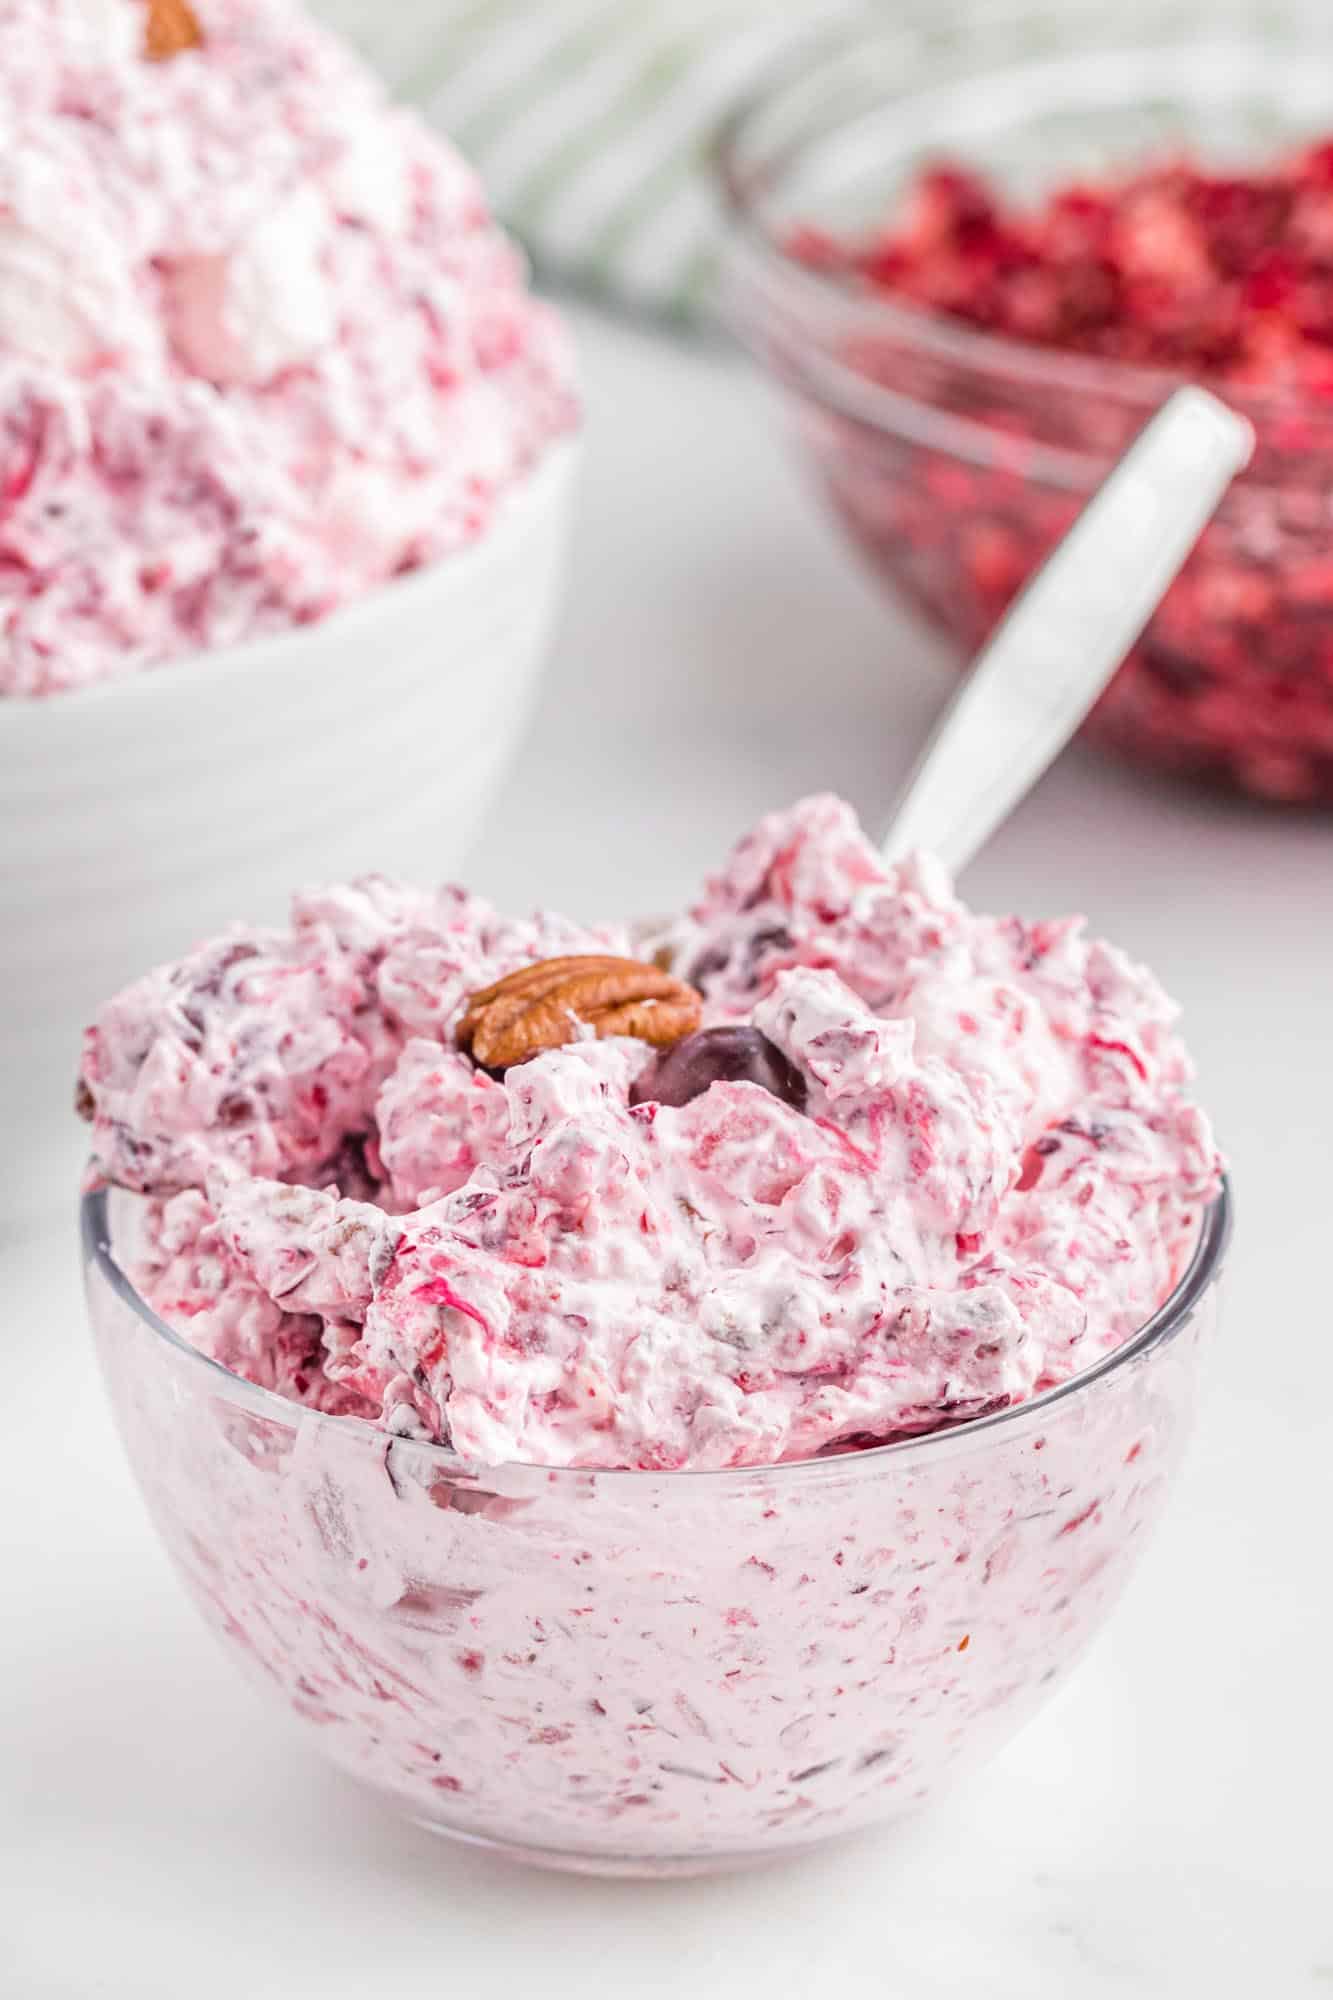 Cranberry fluff salad in a small glass bowl with a spoon